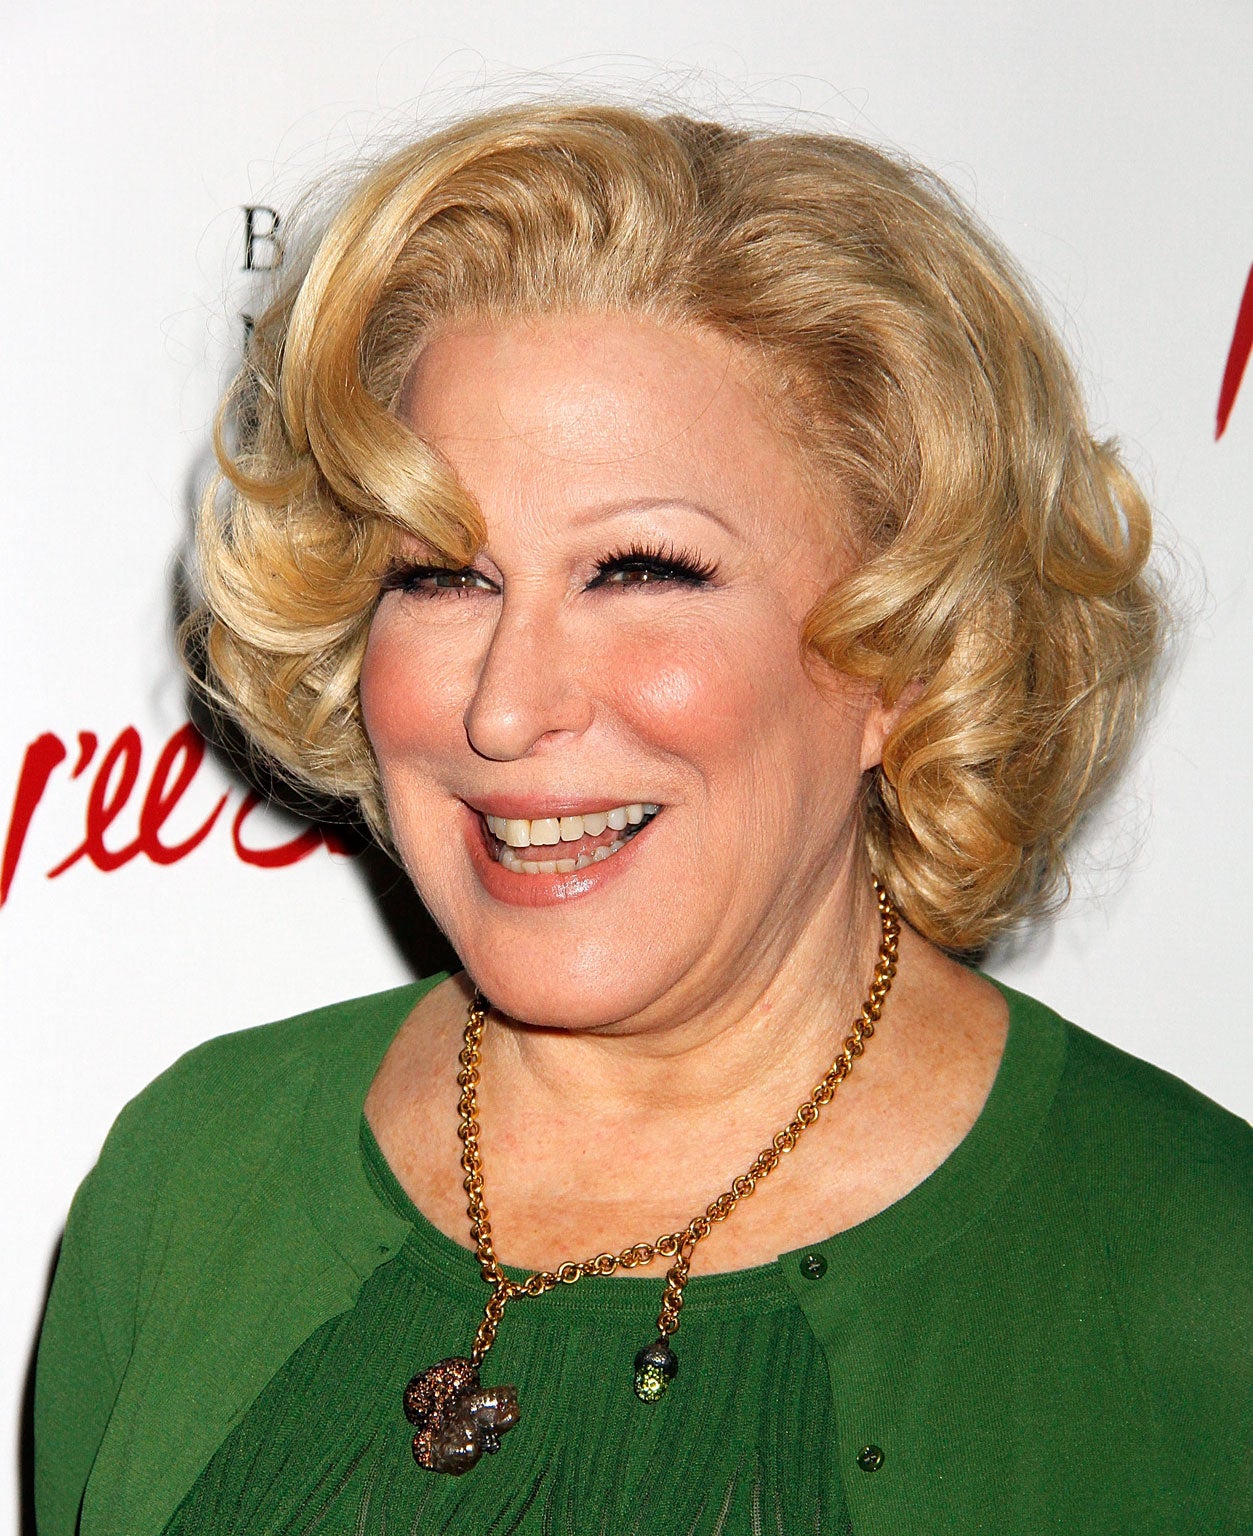 9. Bette Midler on Princess Anne: “She loves nature, in spite of what it did to her.”